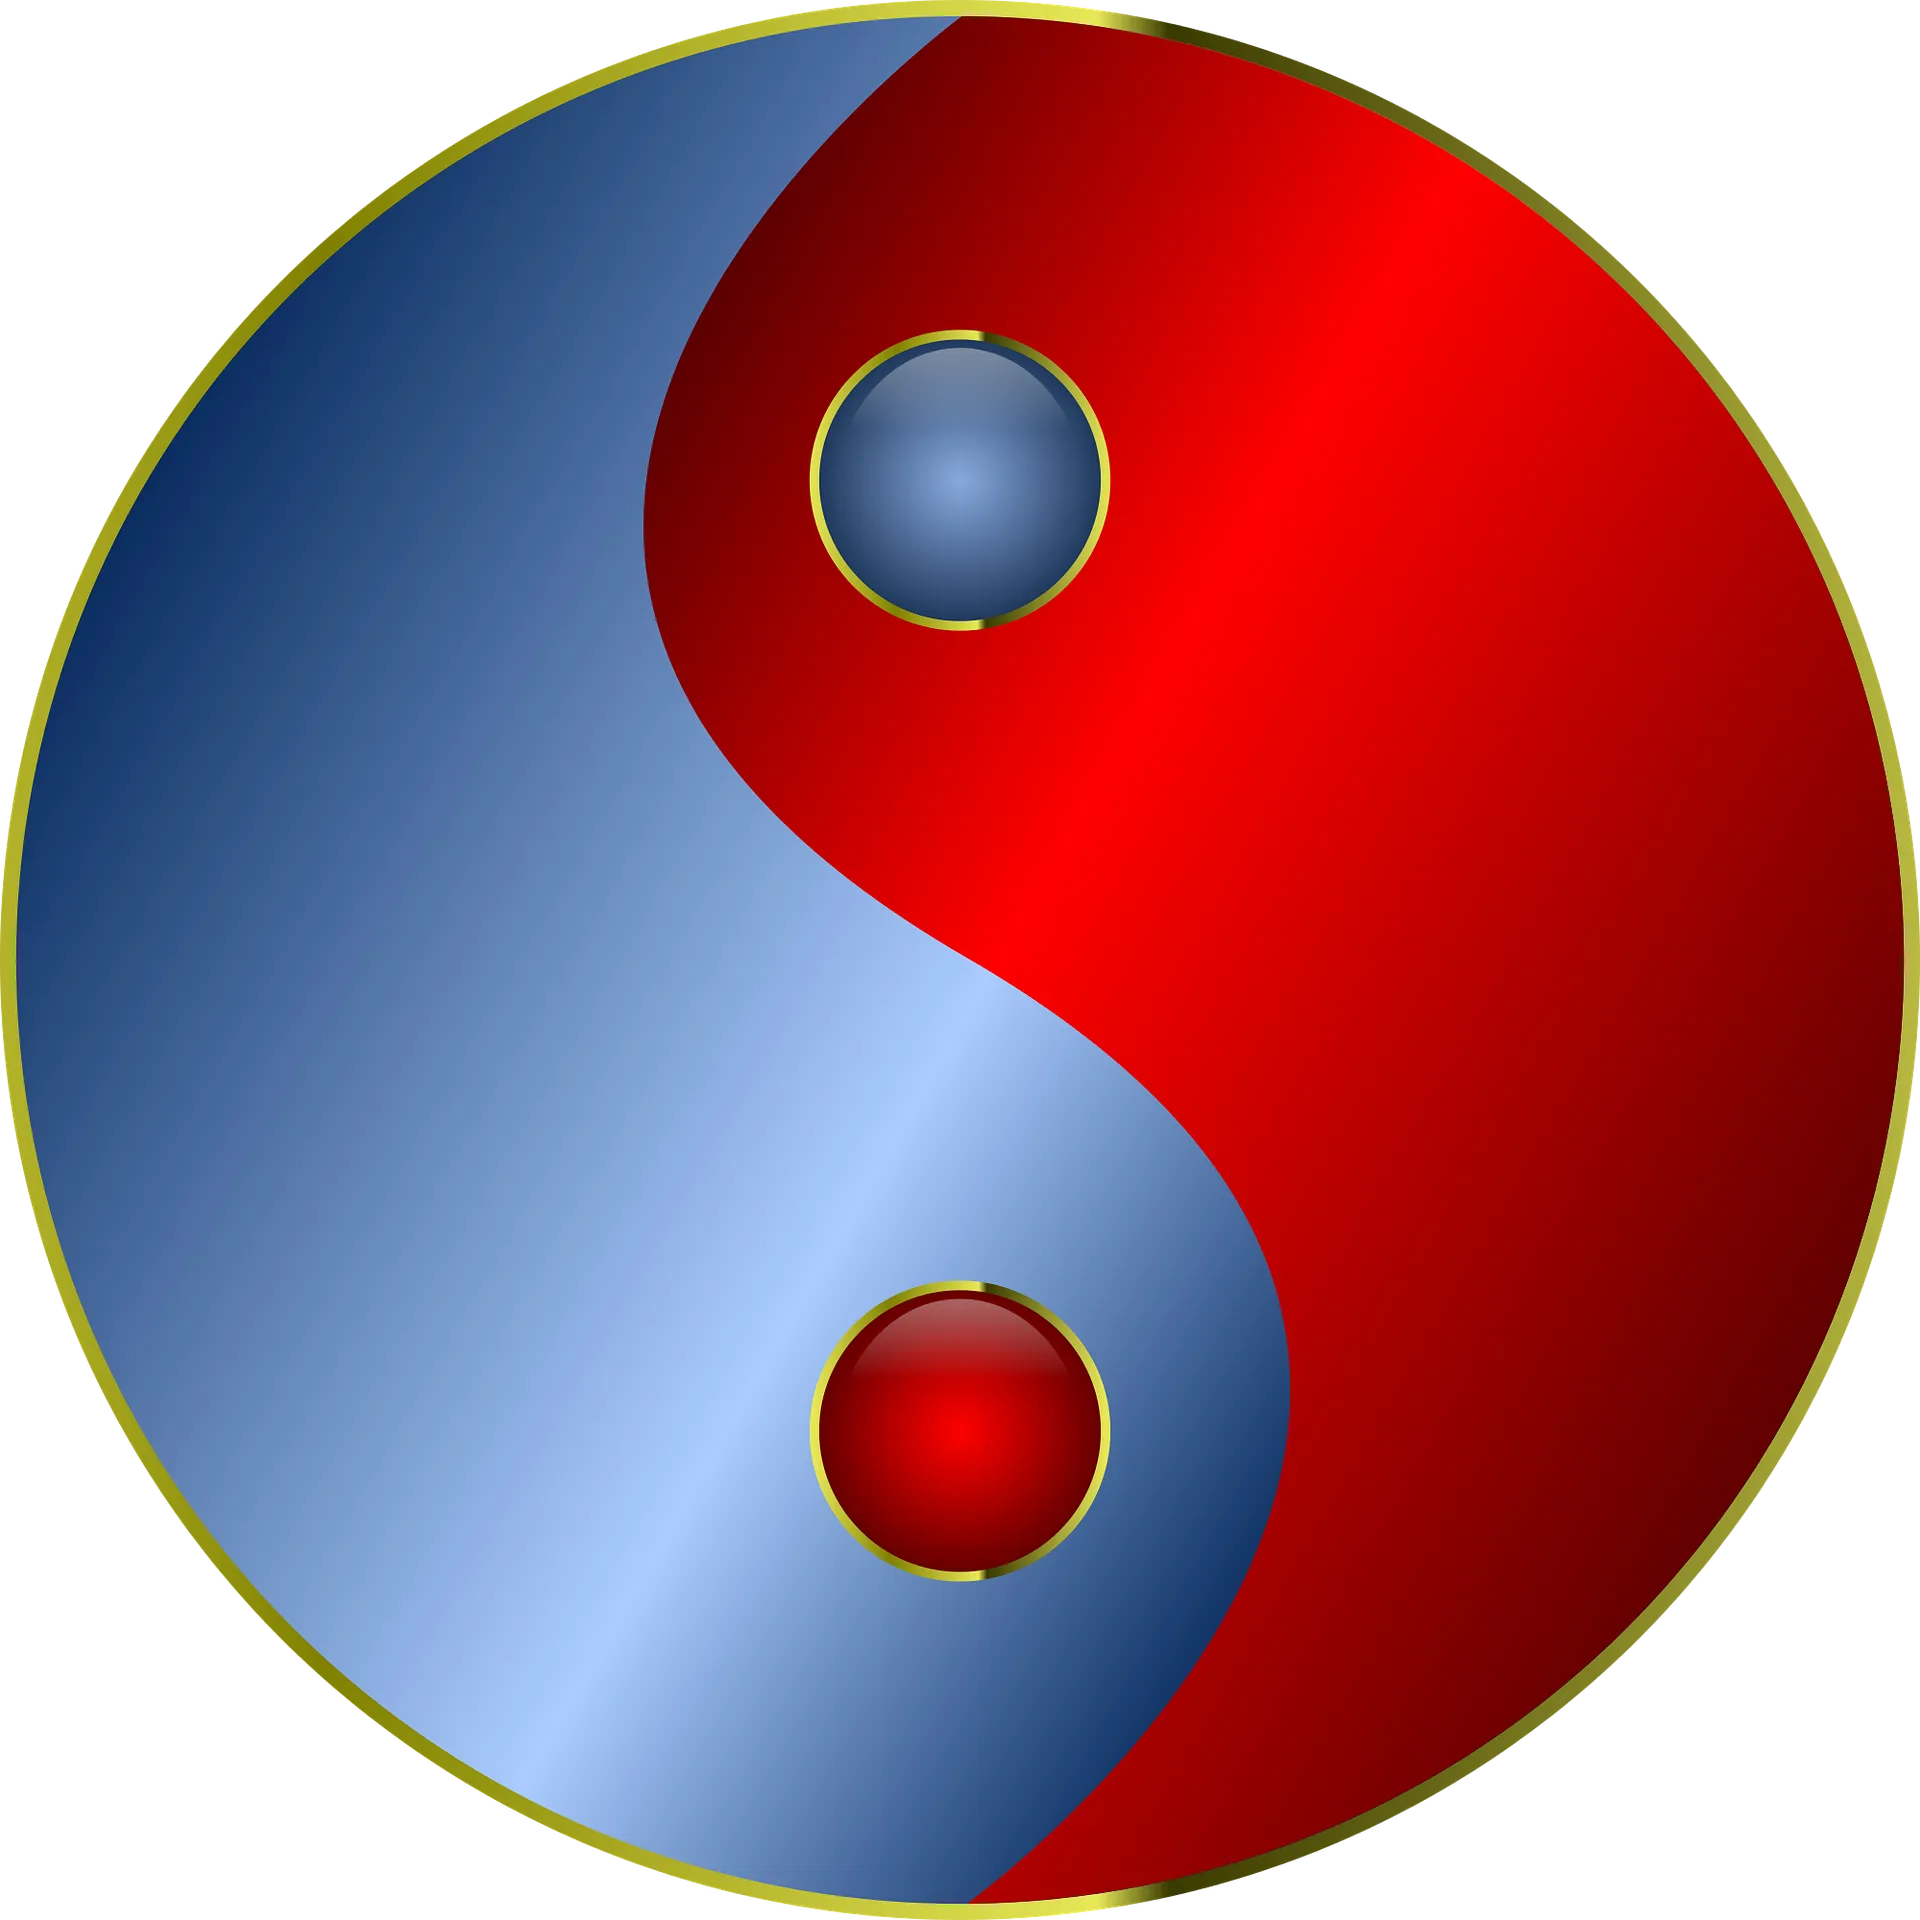 Yin-Yang in Chinese philosophy. (Reminiscent of the principle of movement between poles)